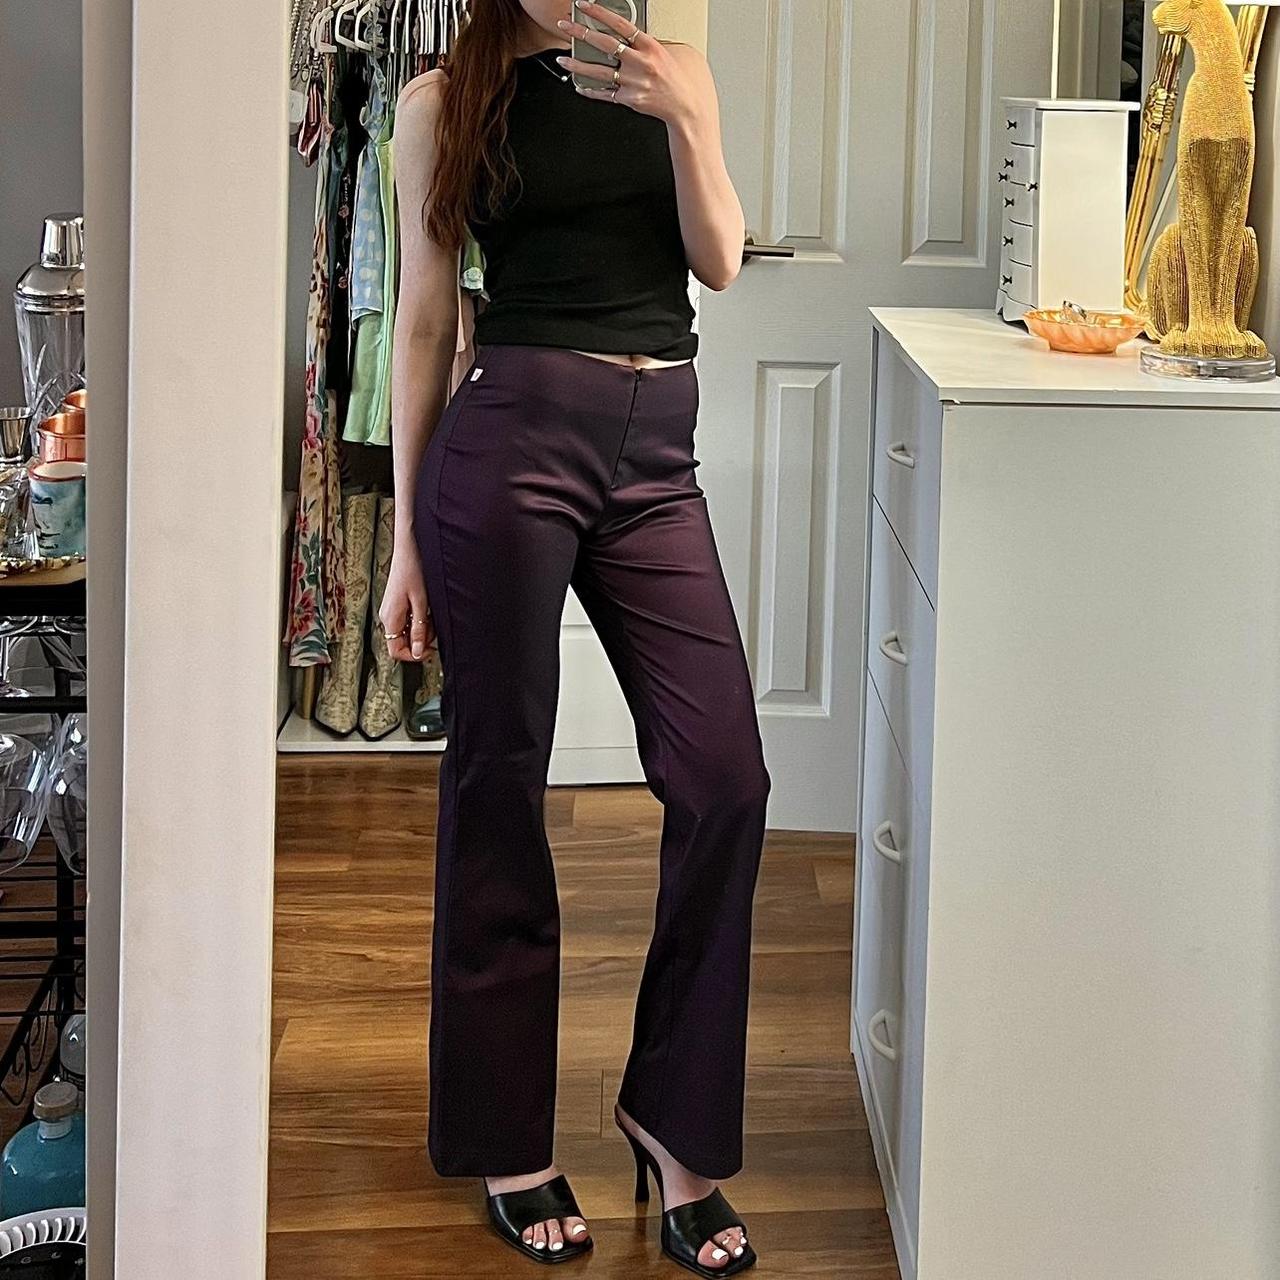 Isabella Vrana Limited Edition Brandy Trousers in a... - Depop